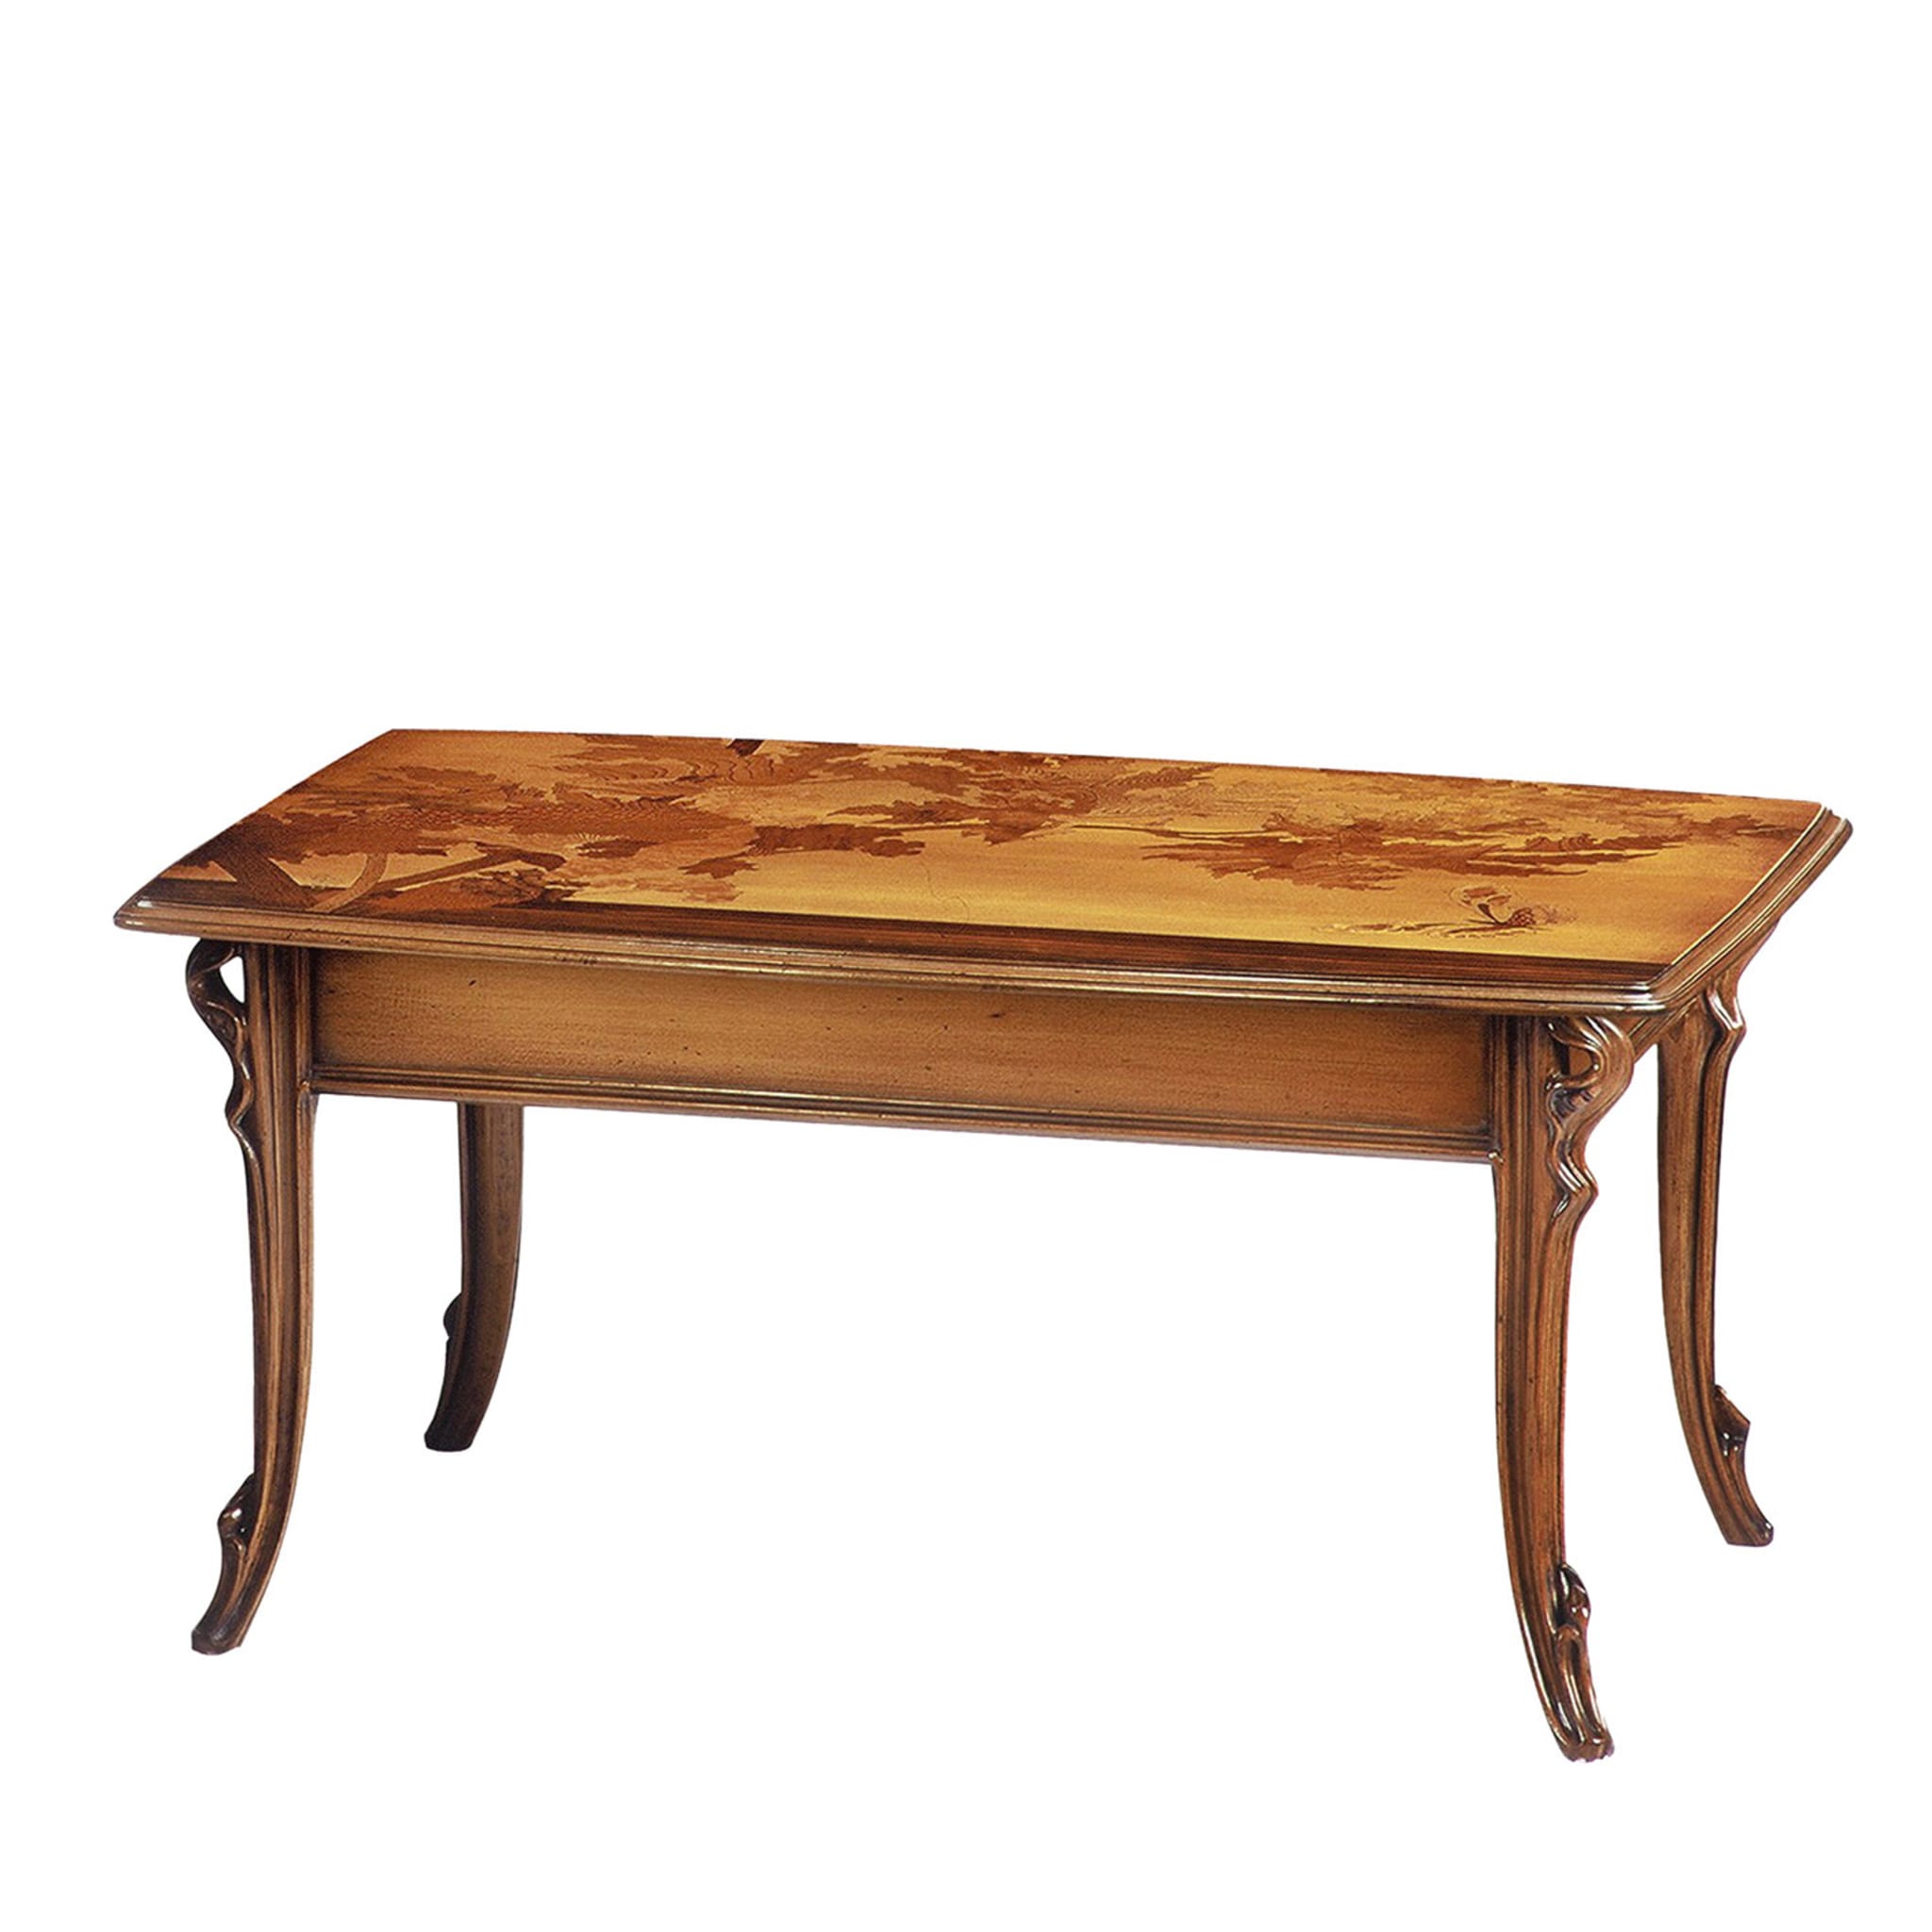 French Art Nouveau-Style Rectangular Coffee Table by Emile Gallè - Main view